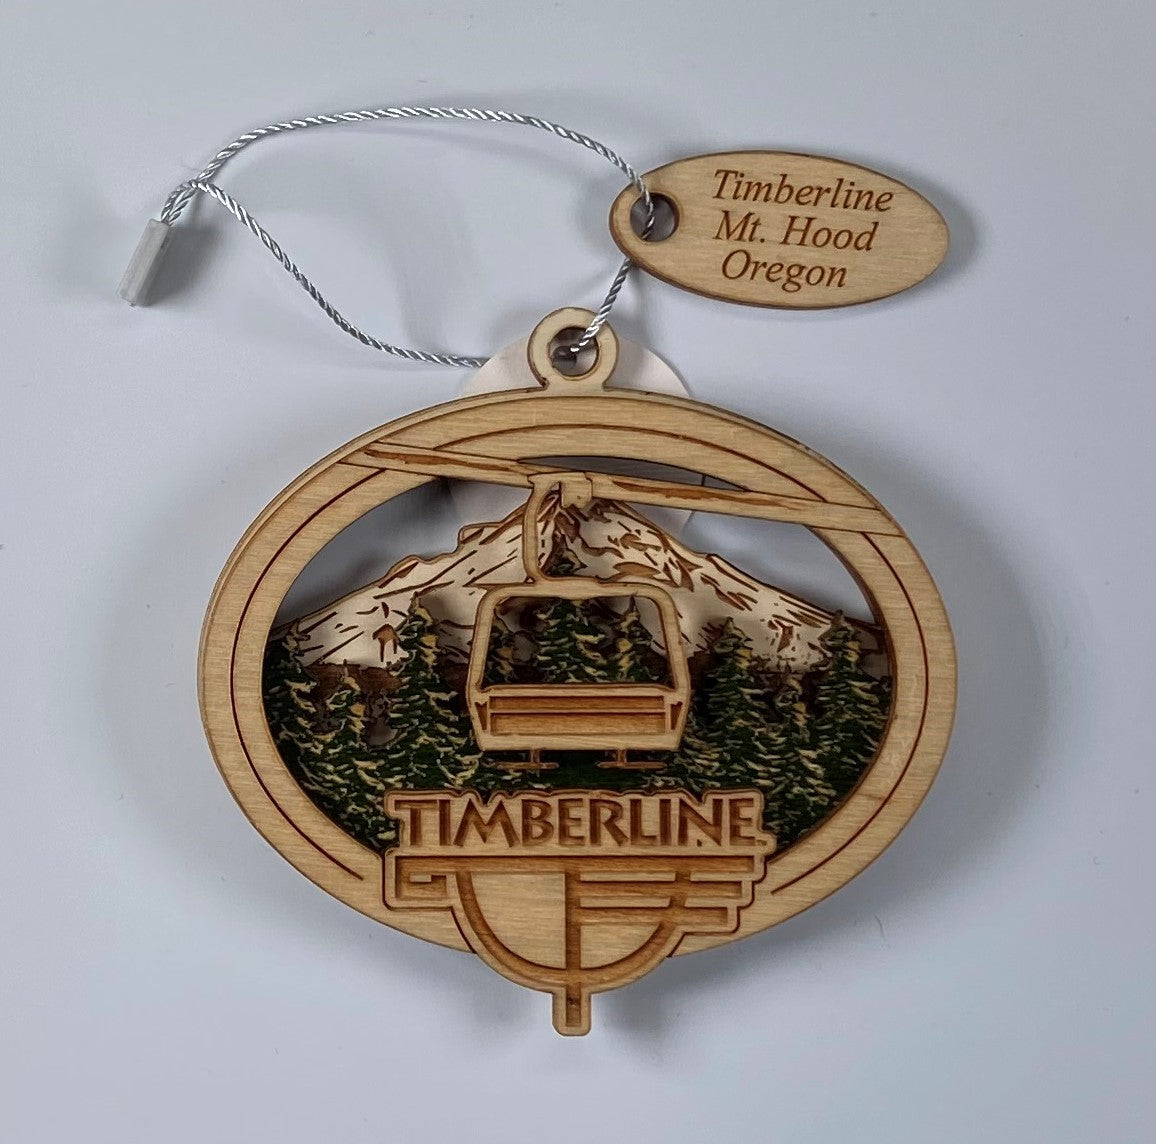 Oval Chairlift Wood Carved Ornament